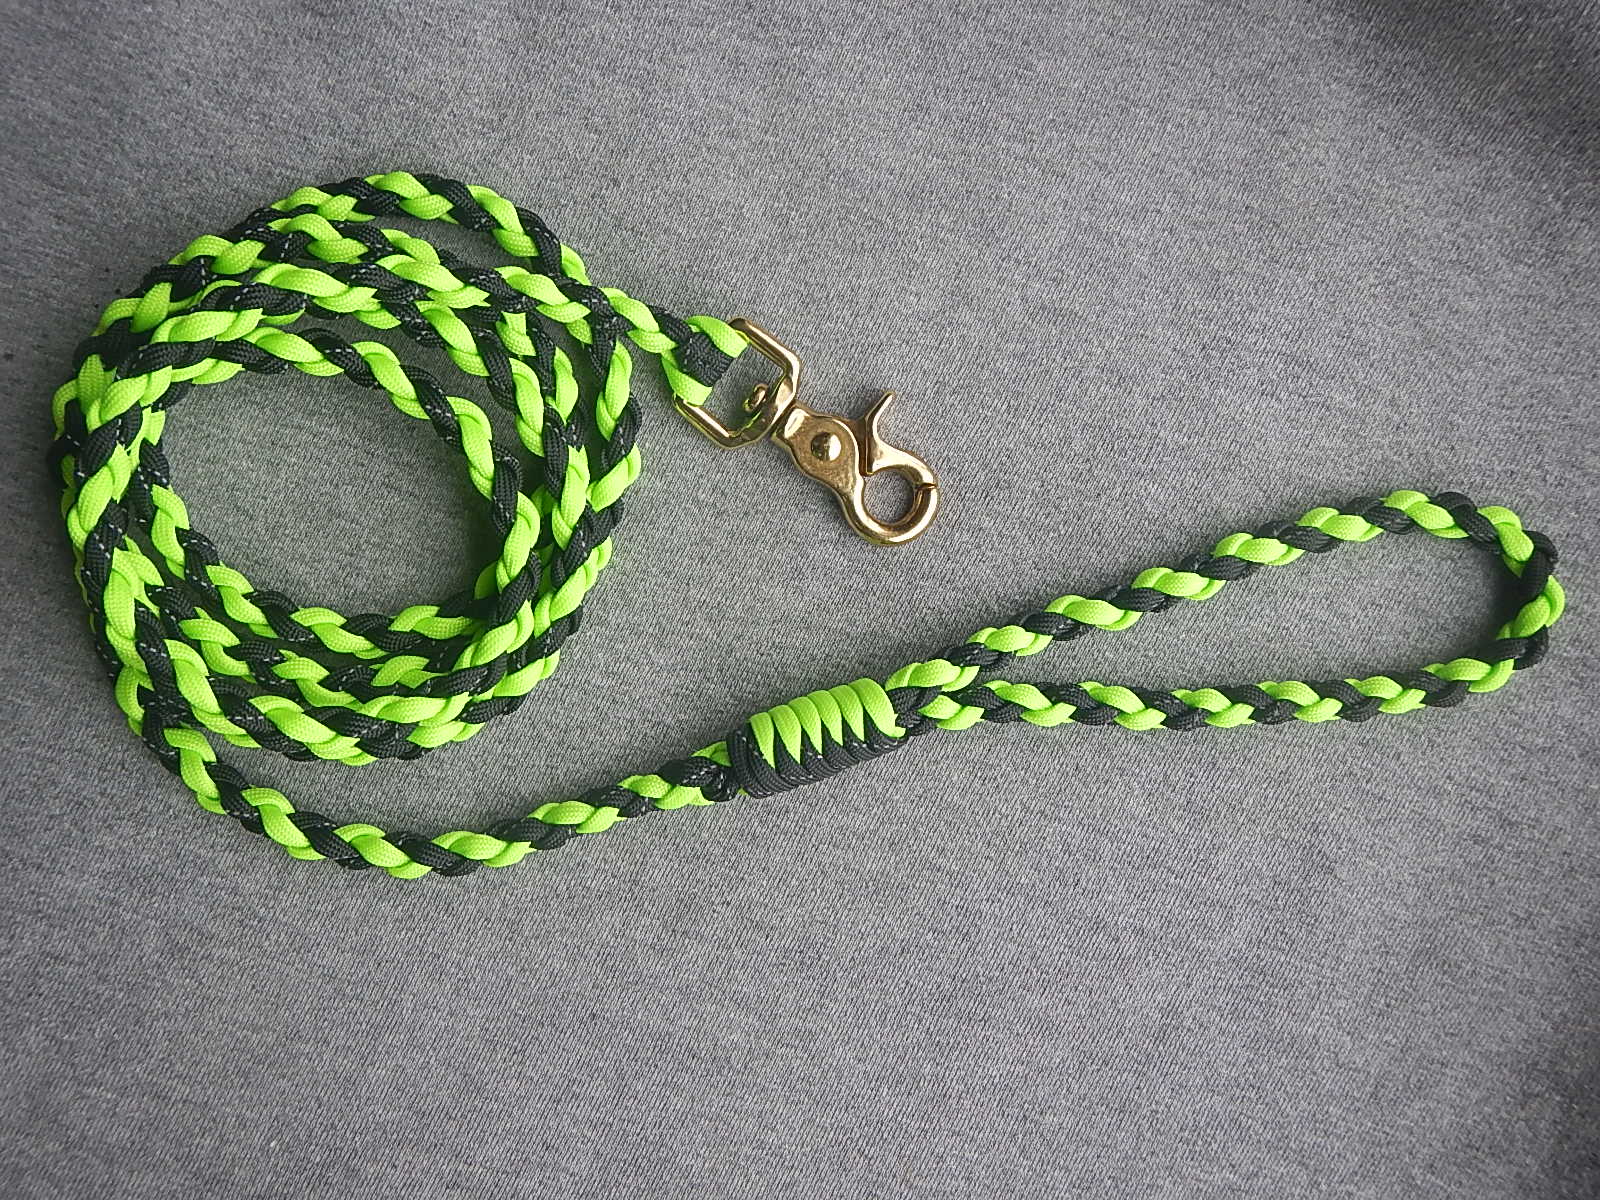 Neon Green And Black Paracord Leash - Paracreations USA